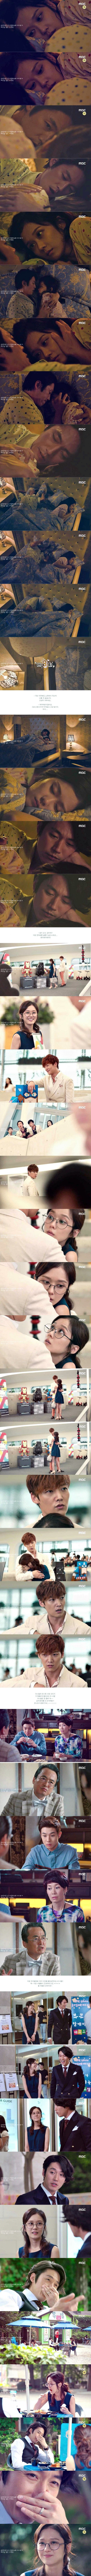 episode 8 captures for the Korean drama 'Fated to Love You'